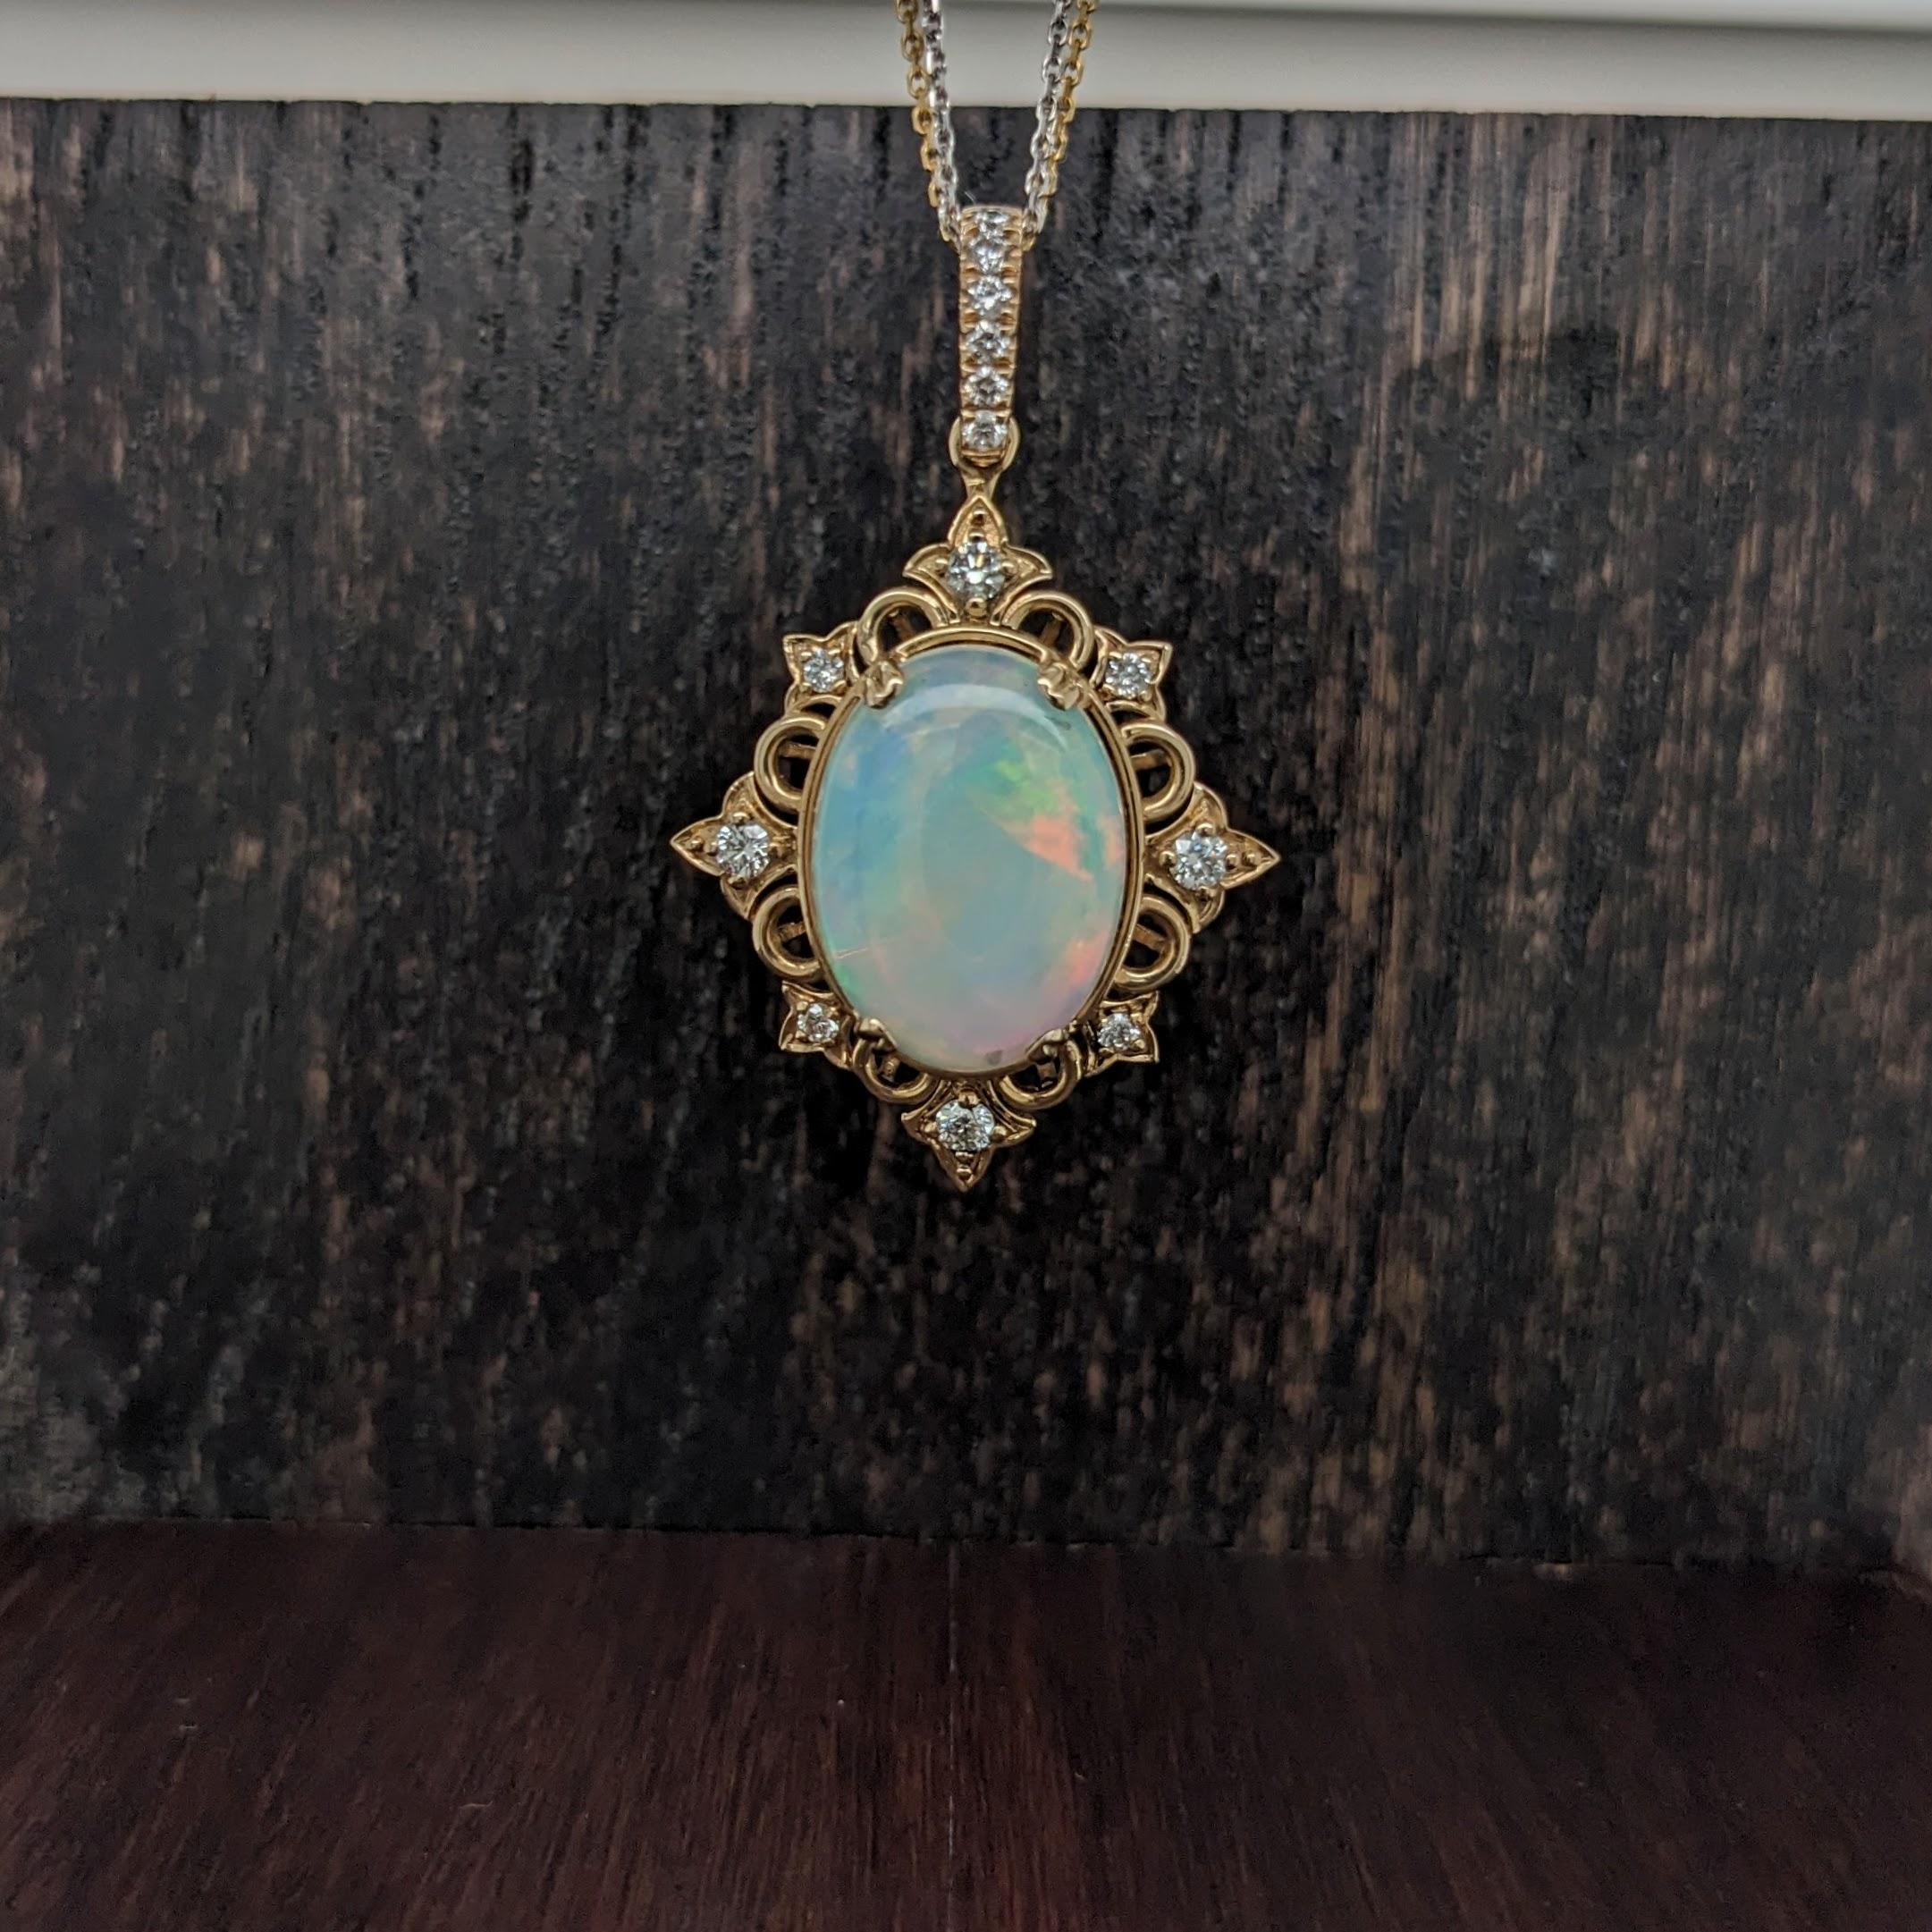 Cabochon 4.57ct Opal Pendant w Diamond Accents in Solid 14k Yellow Gold Oval 16.7x12.3mm